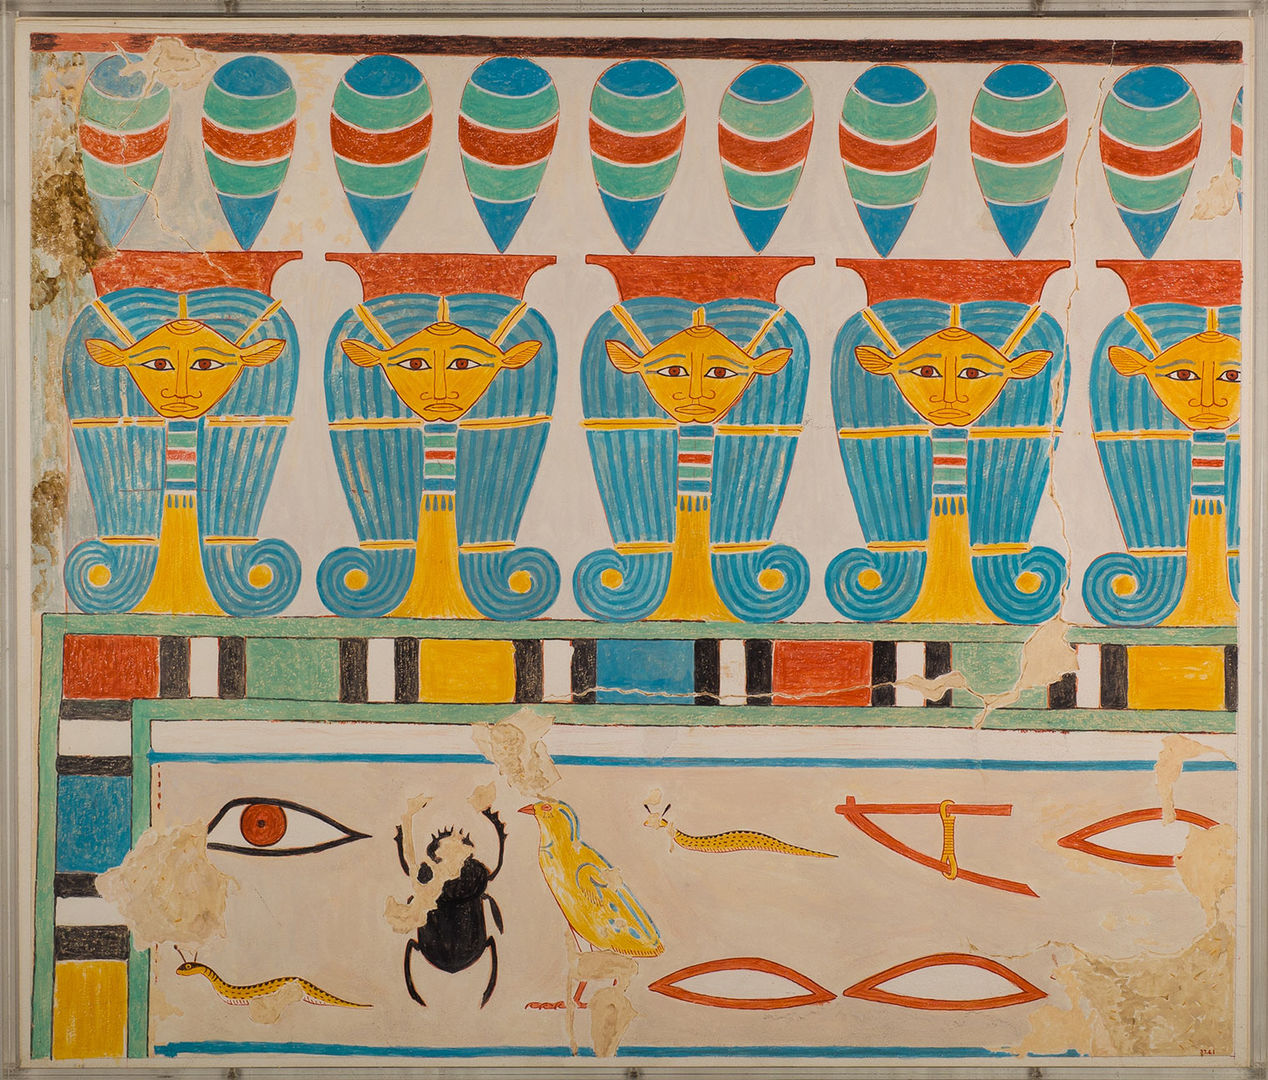 Colorful design with women's heads wearing curled wigs and a line of hieroglyphs.